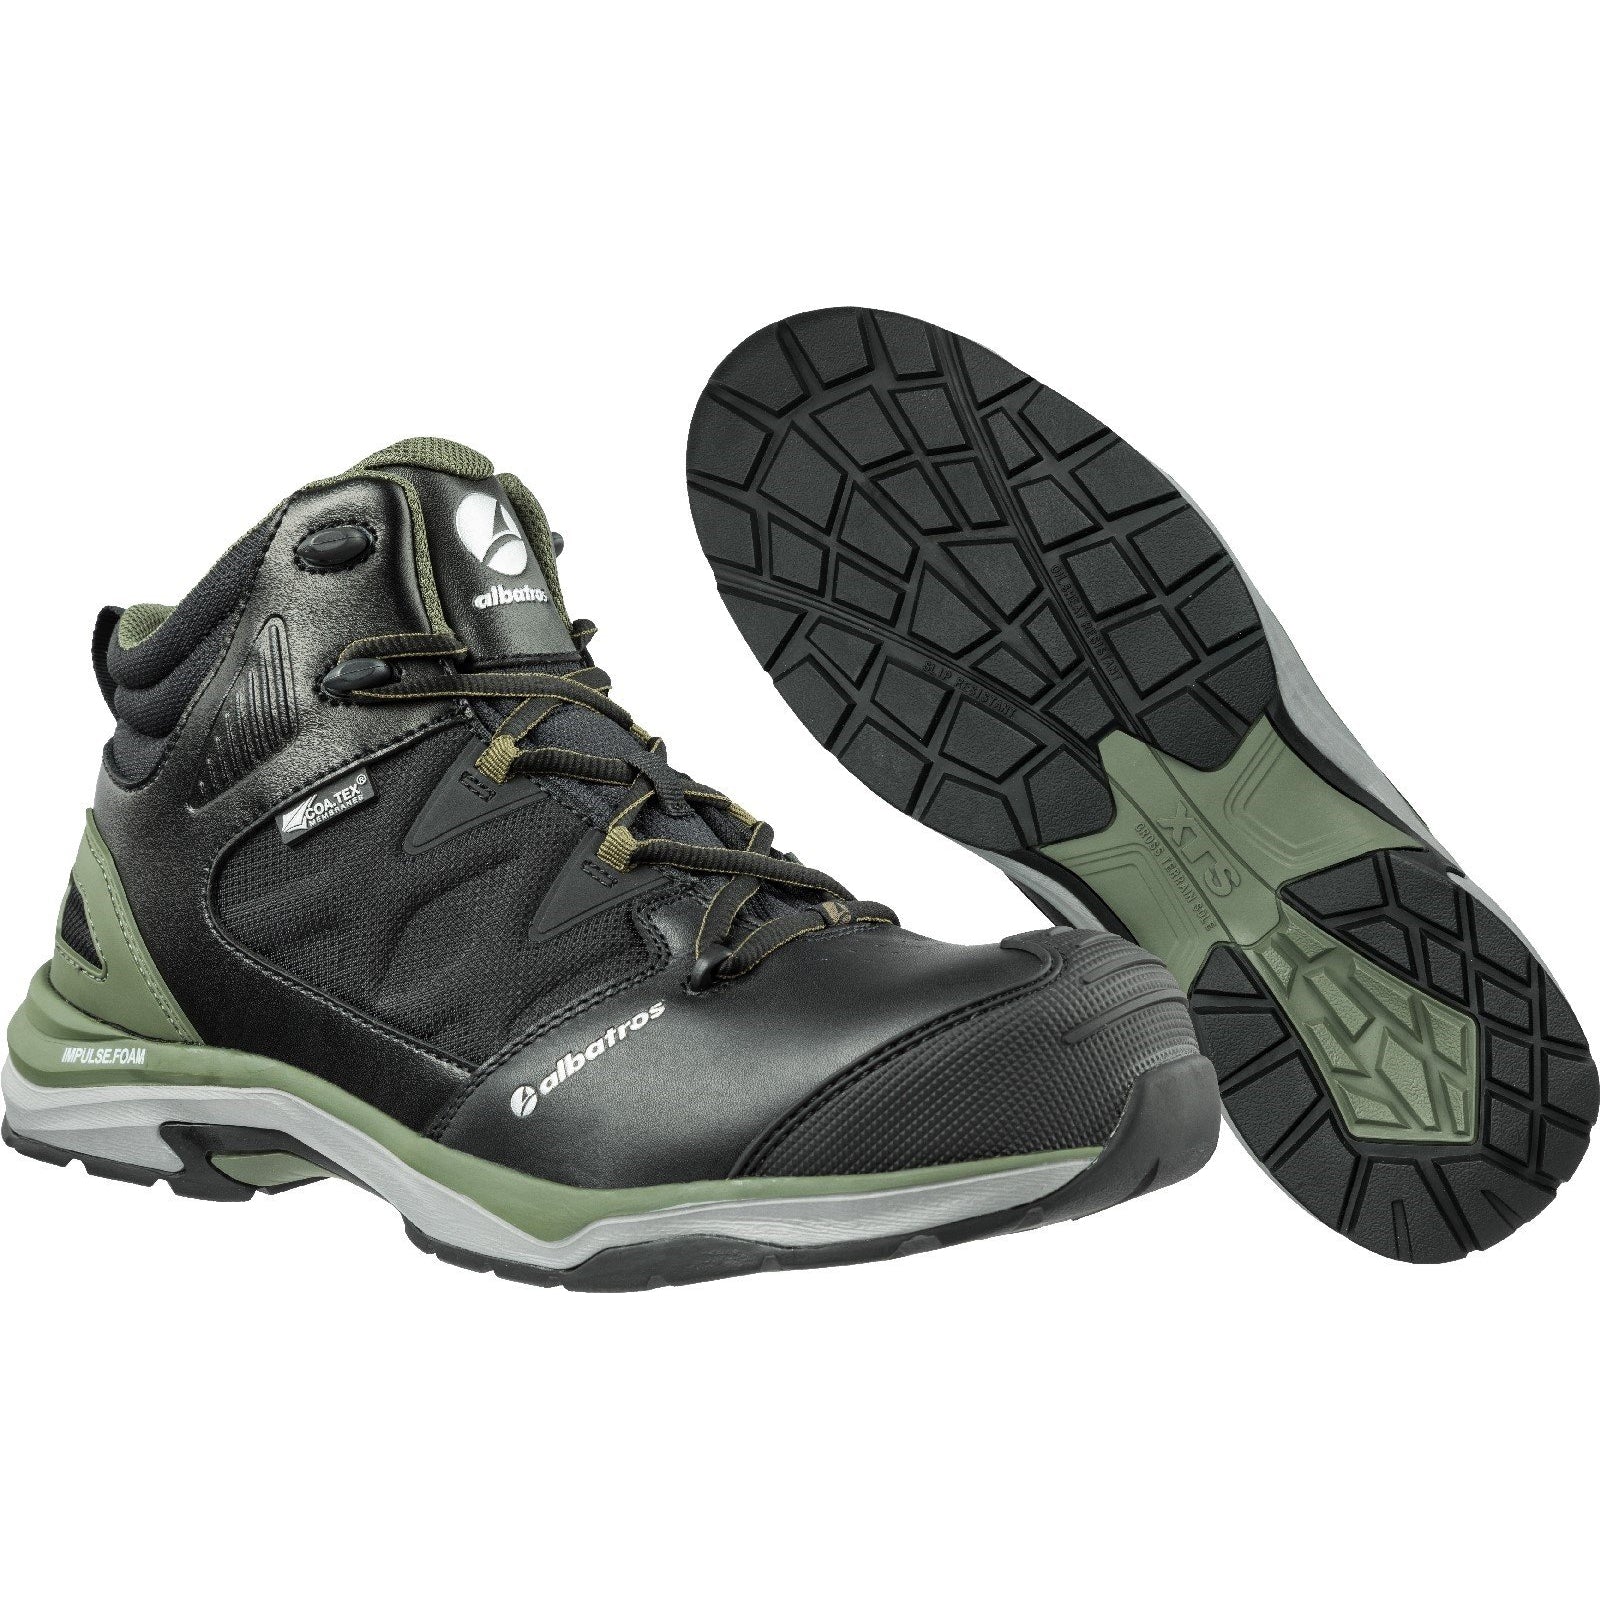 Albatros Ultratrail Olive Ctx Workwear Safety – GS Boots Mid